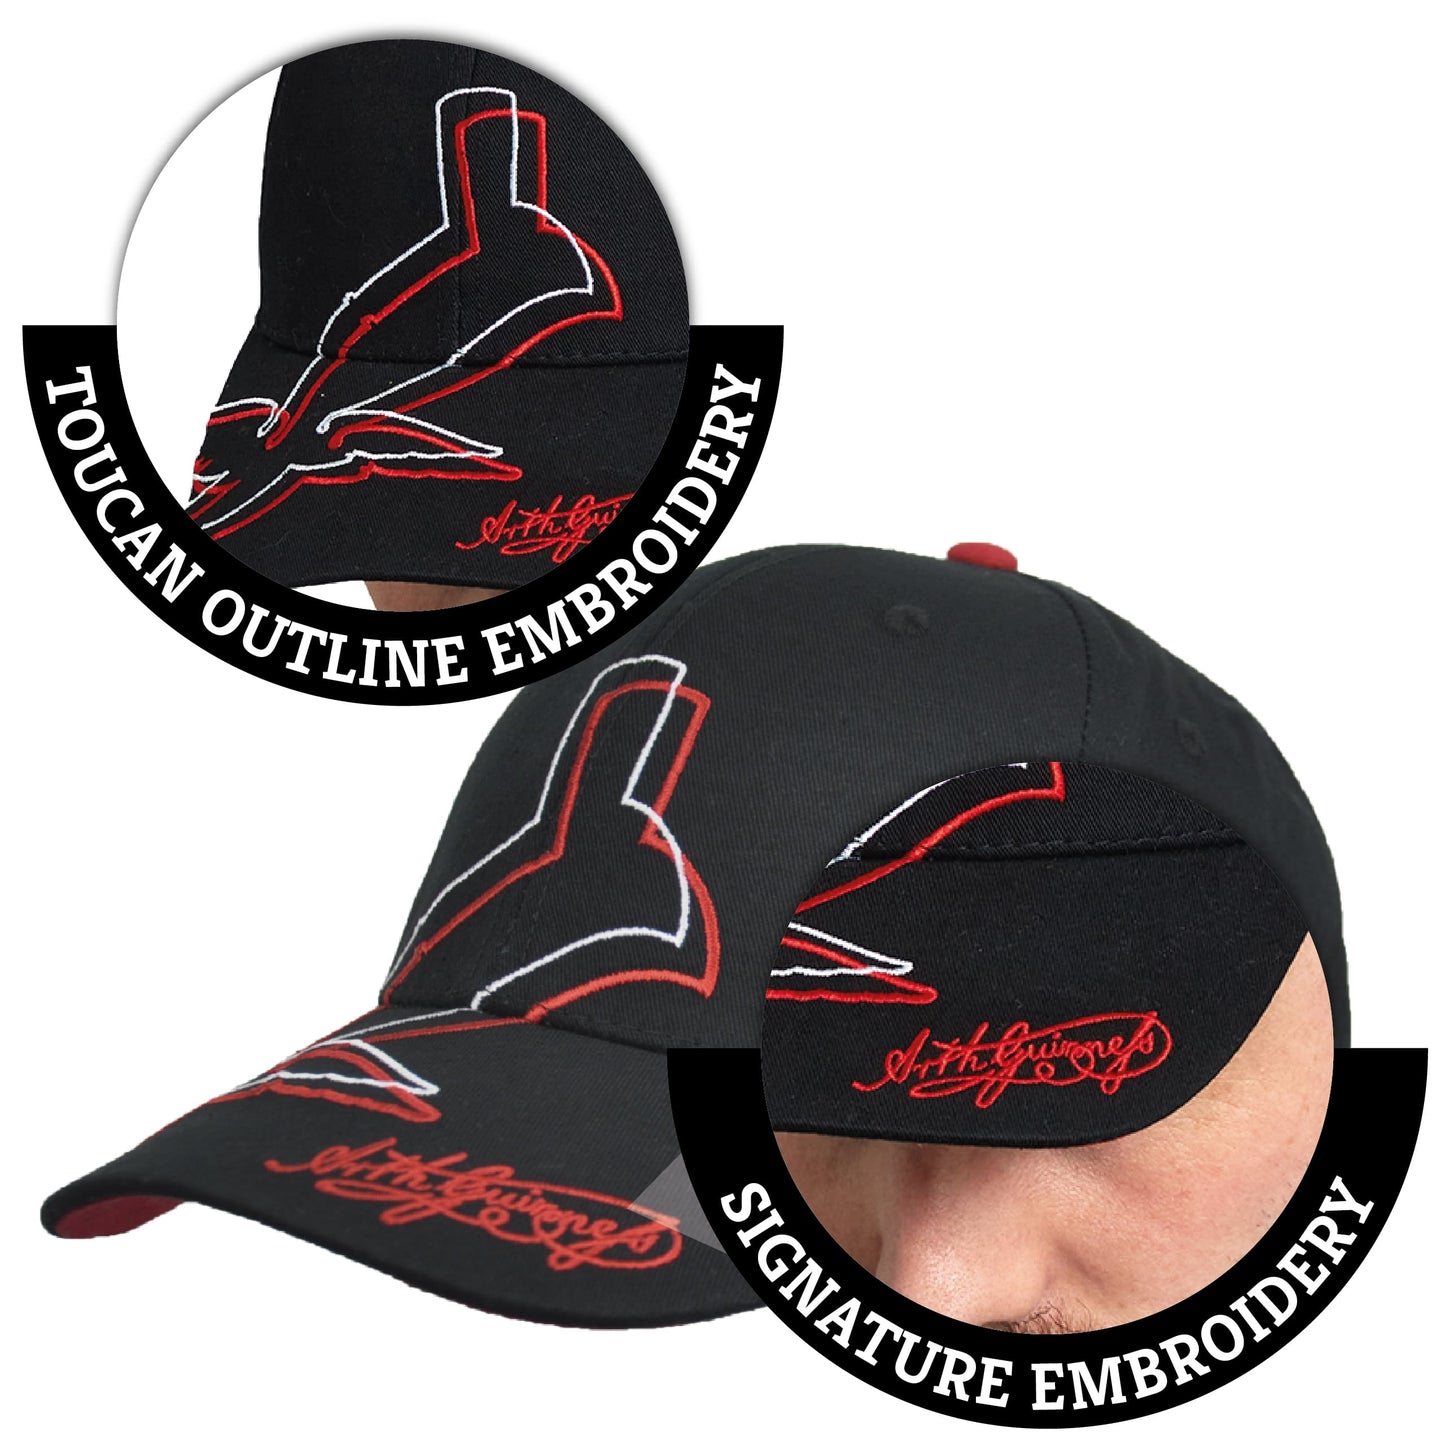 A black Guinness UK baseball cap with a Red Toucan logo on it.